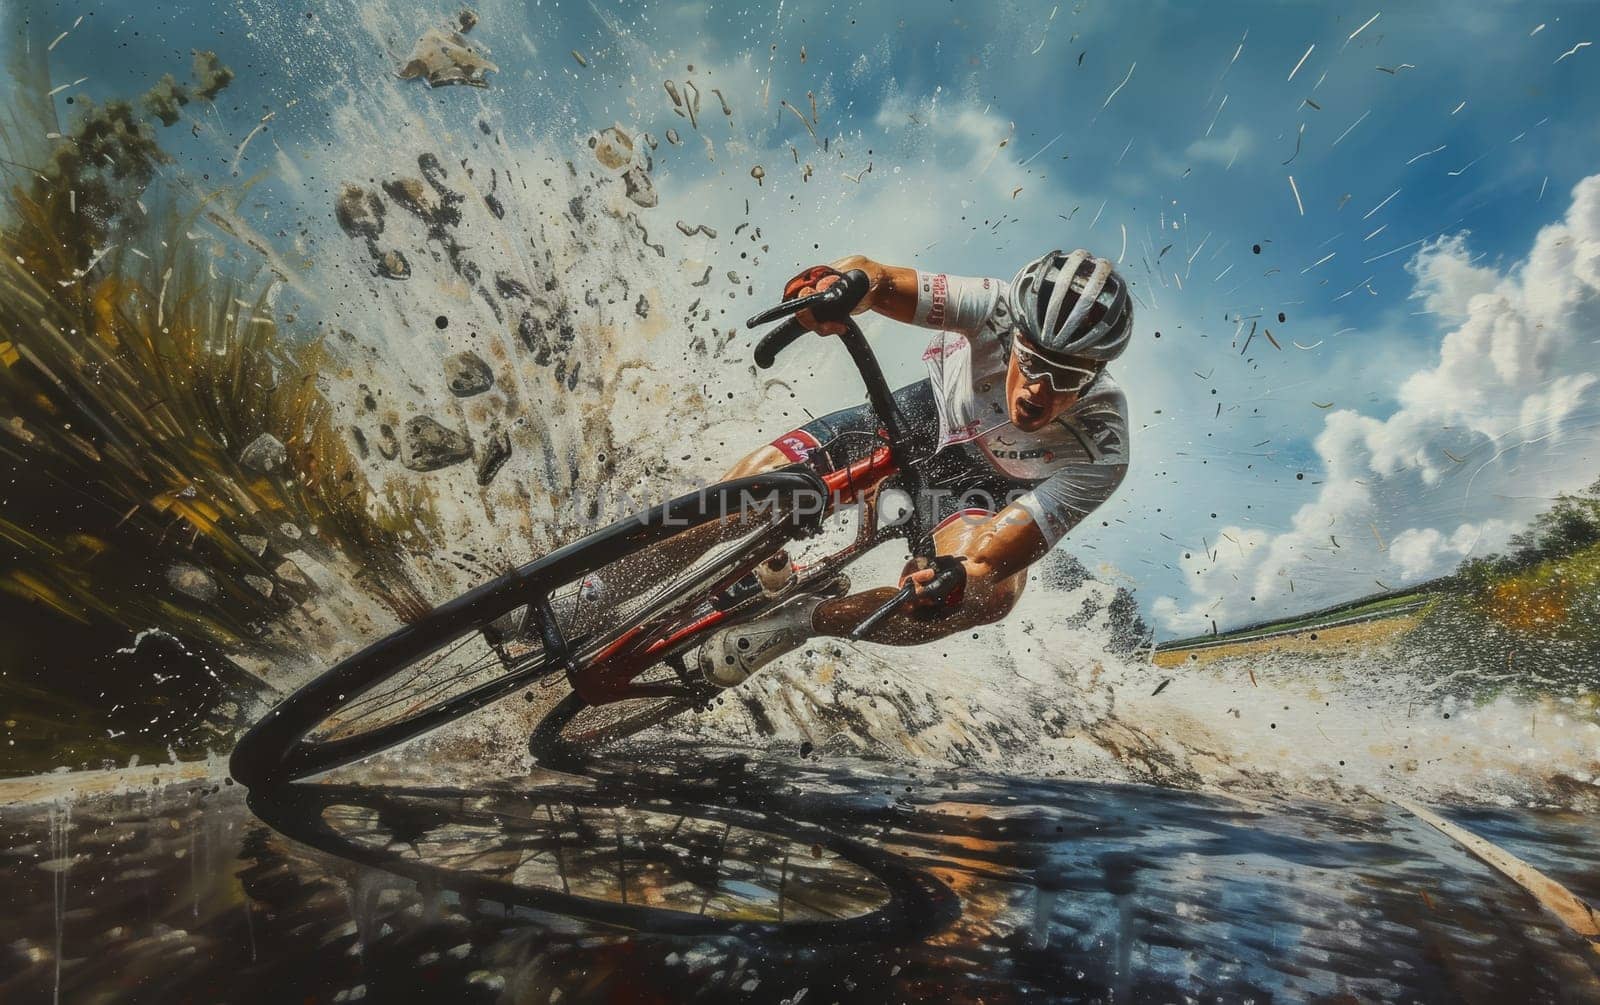 Dynamic image of a cyclist in action, splashing mud, amidst nature under a bright sky